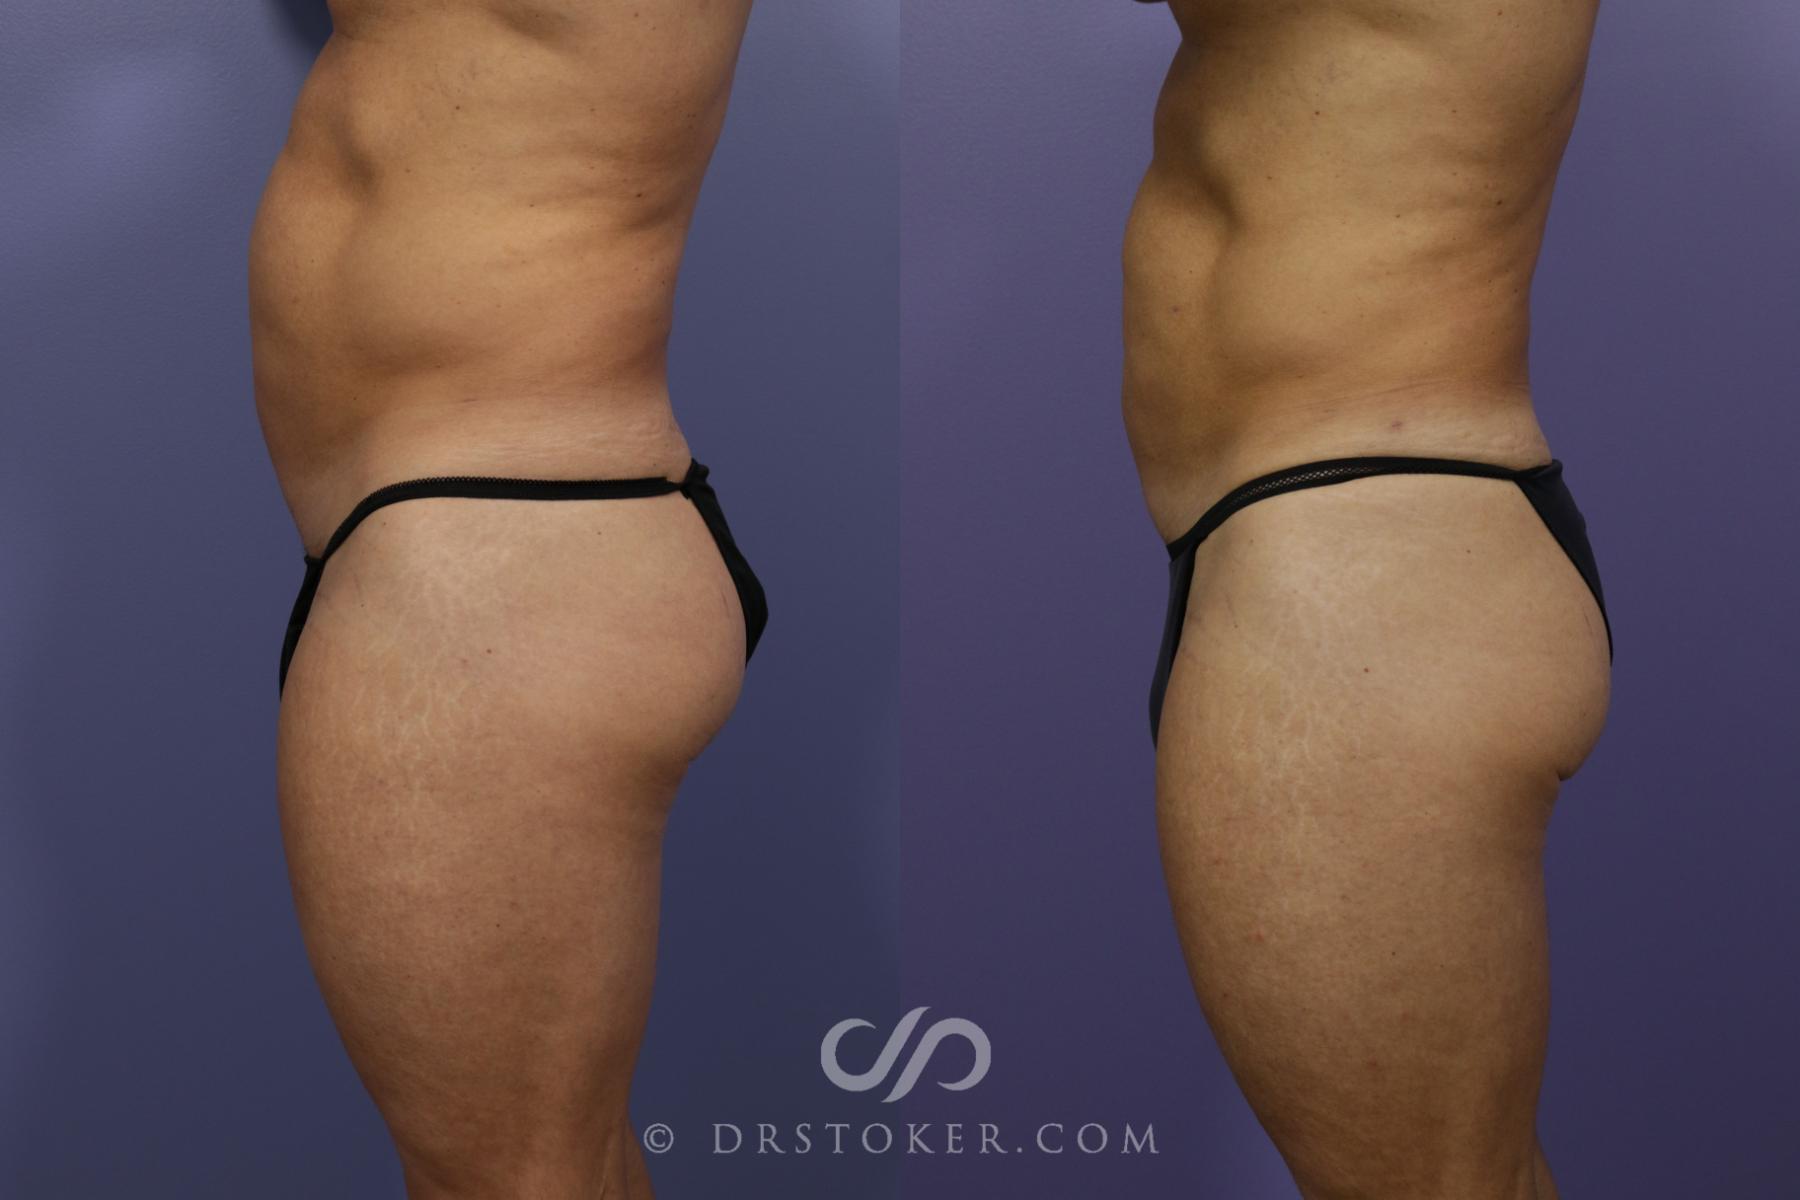 Liposuction Abdomen and Flanks Case 7001 - The Plastic Surgery Group